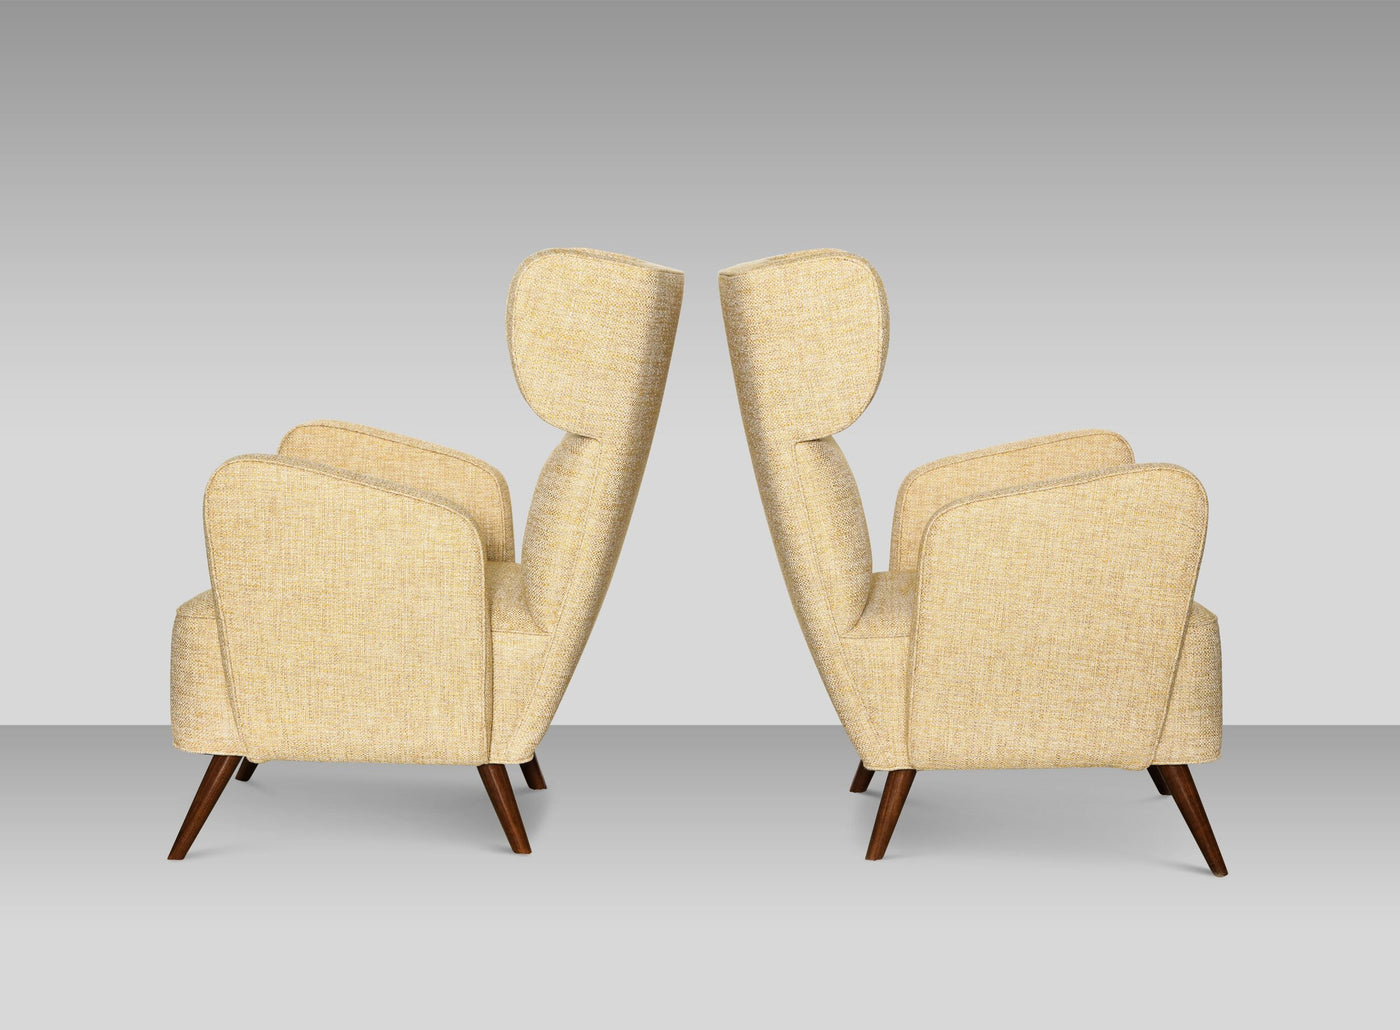 Pair of “Treno” New Production Lounge Chairs by Donzella Ltd.